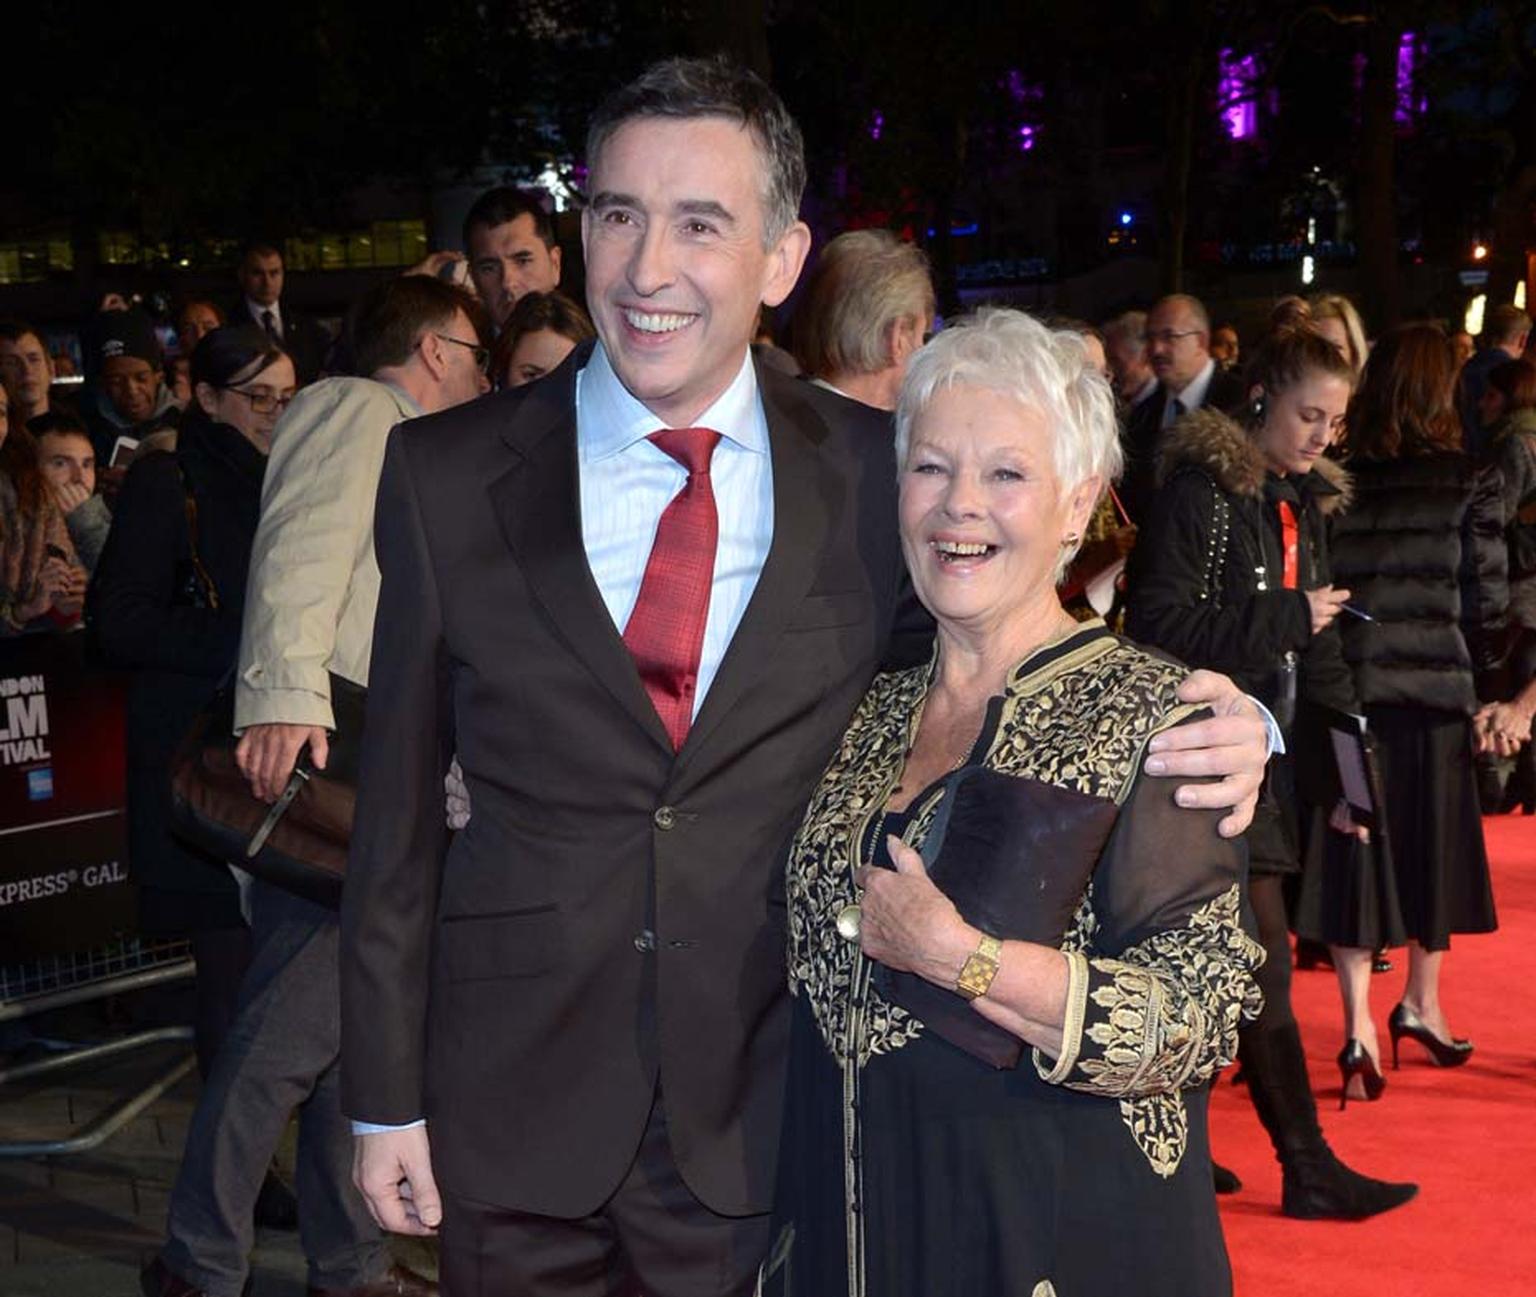 Judi Dench and Steve Coogan on the red carpet of the BFI London Film Festival. Image by: IWC/David M. Benett.